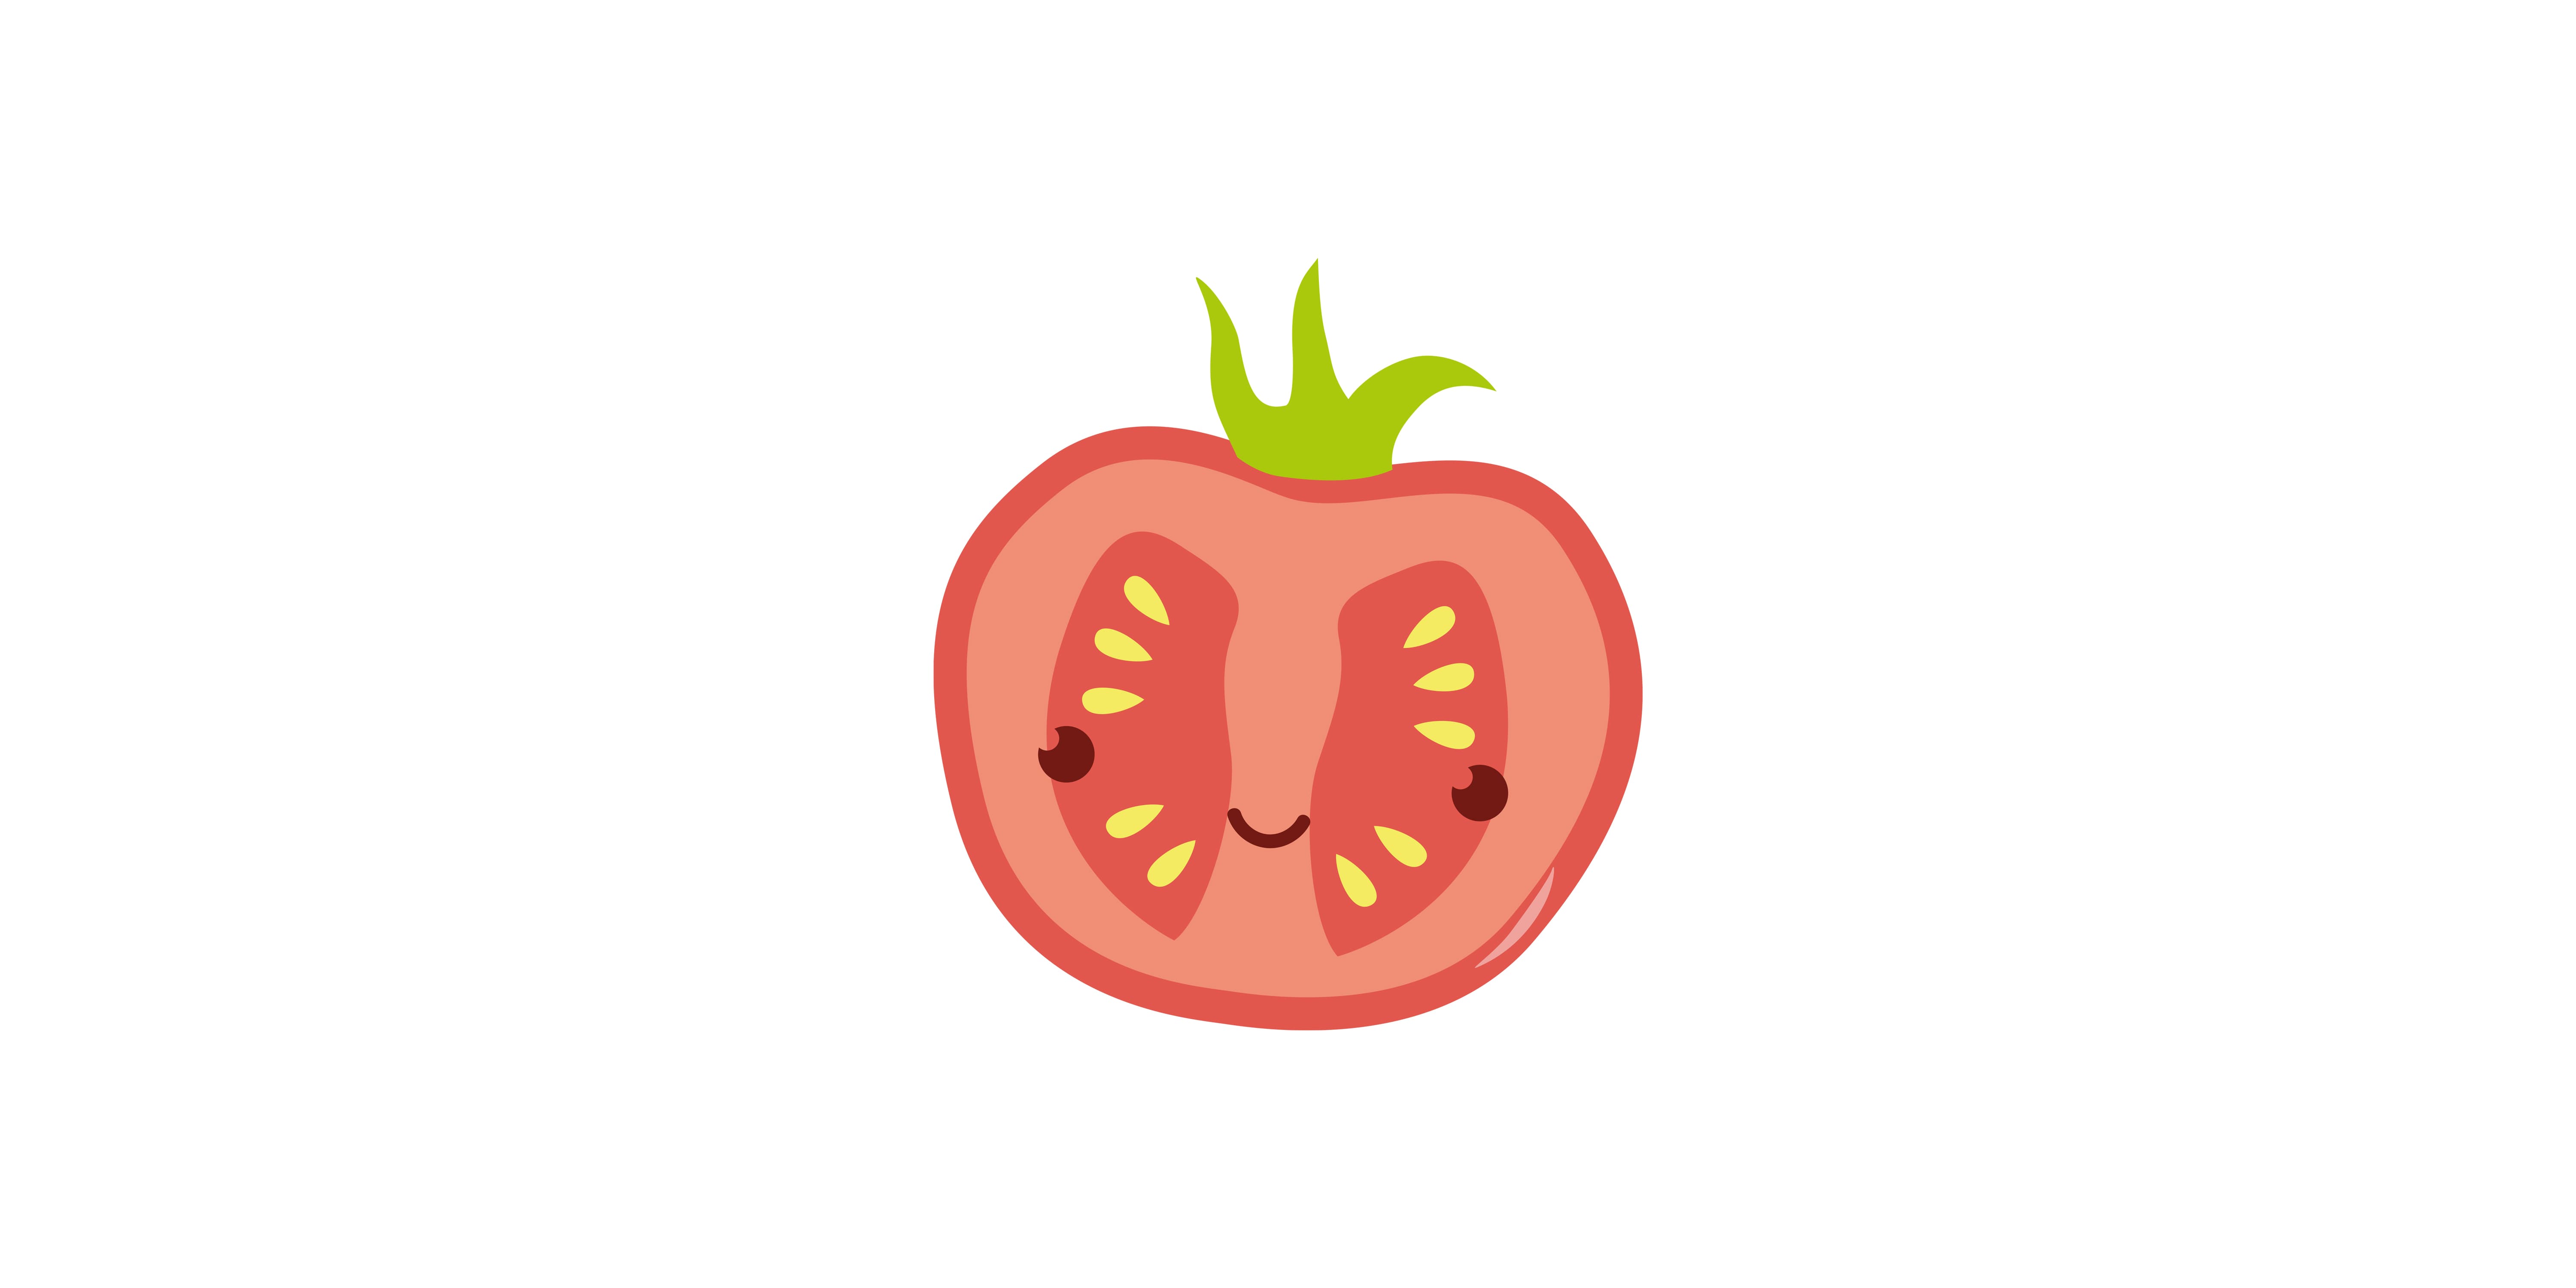 Your baby is now roughly the size of a little tomato.